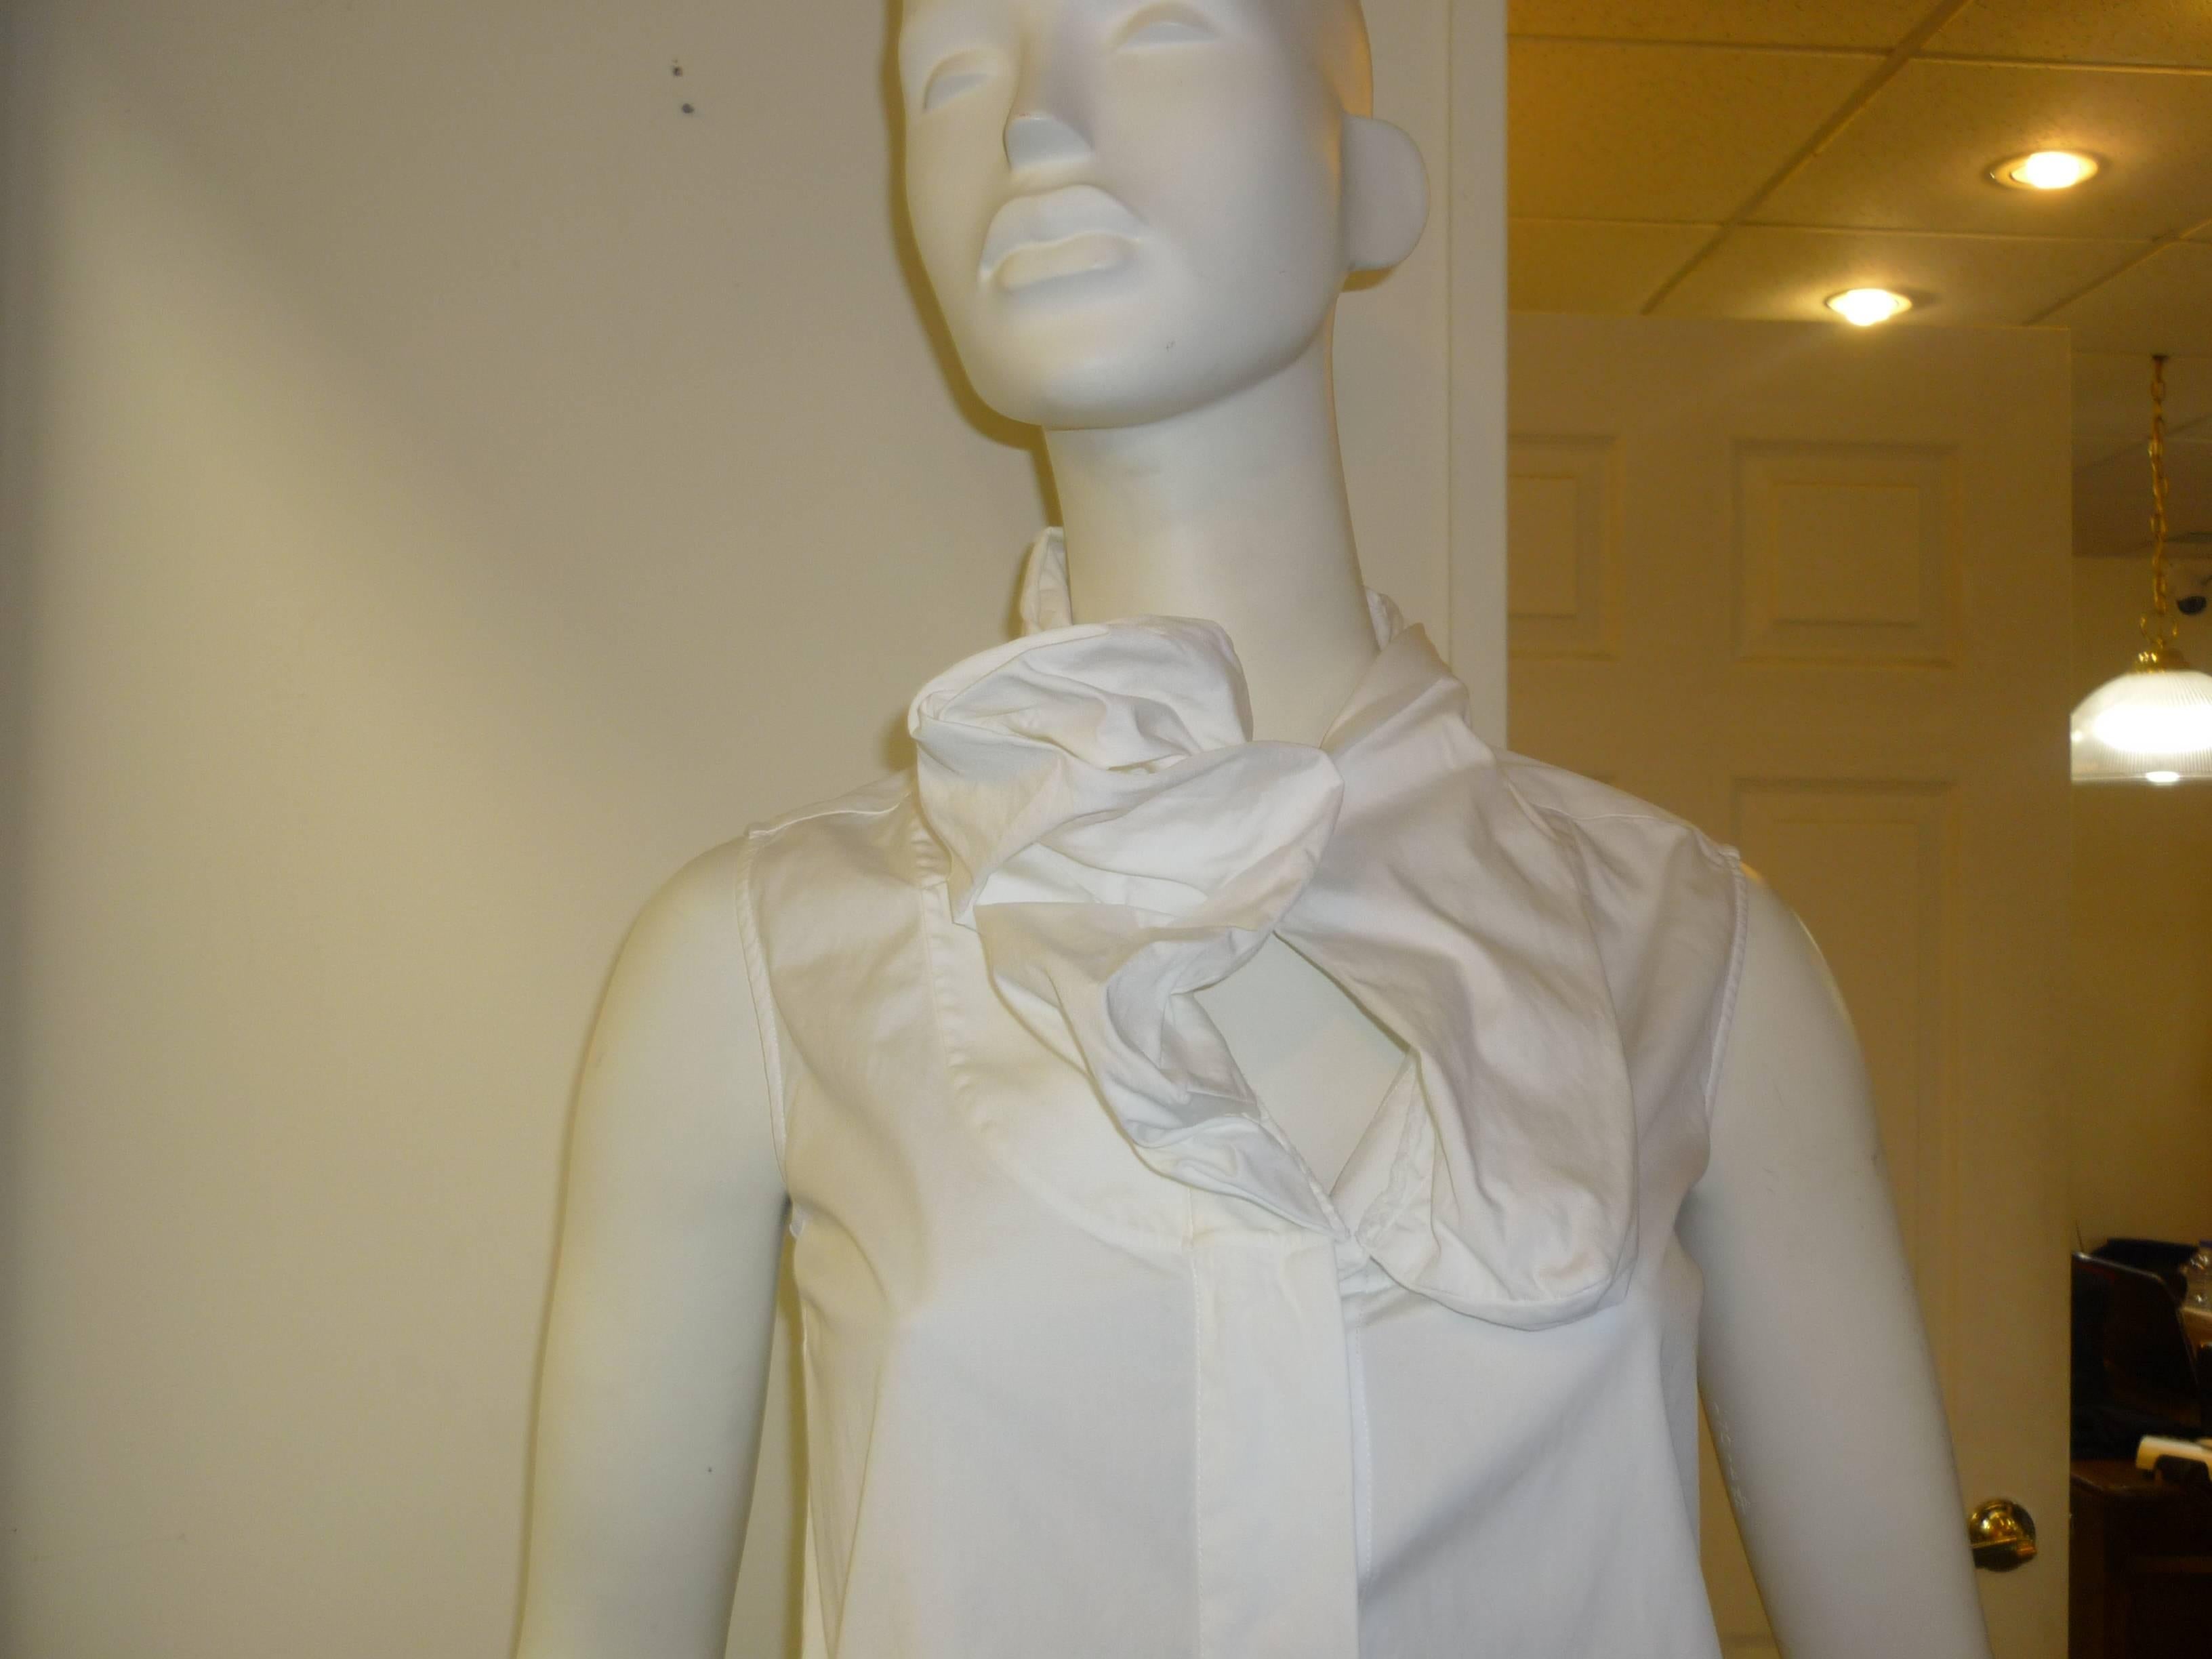 The detail at the collar is reminiscent of Watanabe's style. The ruffle is multi-layered and can be left open or there is a one button closure as per the pictures.

Down the front there is are concealed button, and the back has a tuxedo pleat.